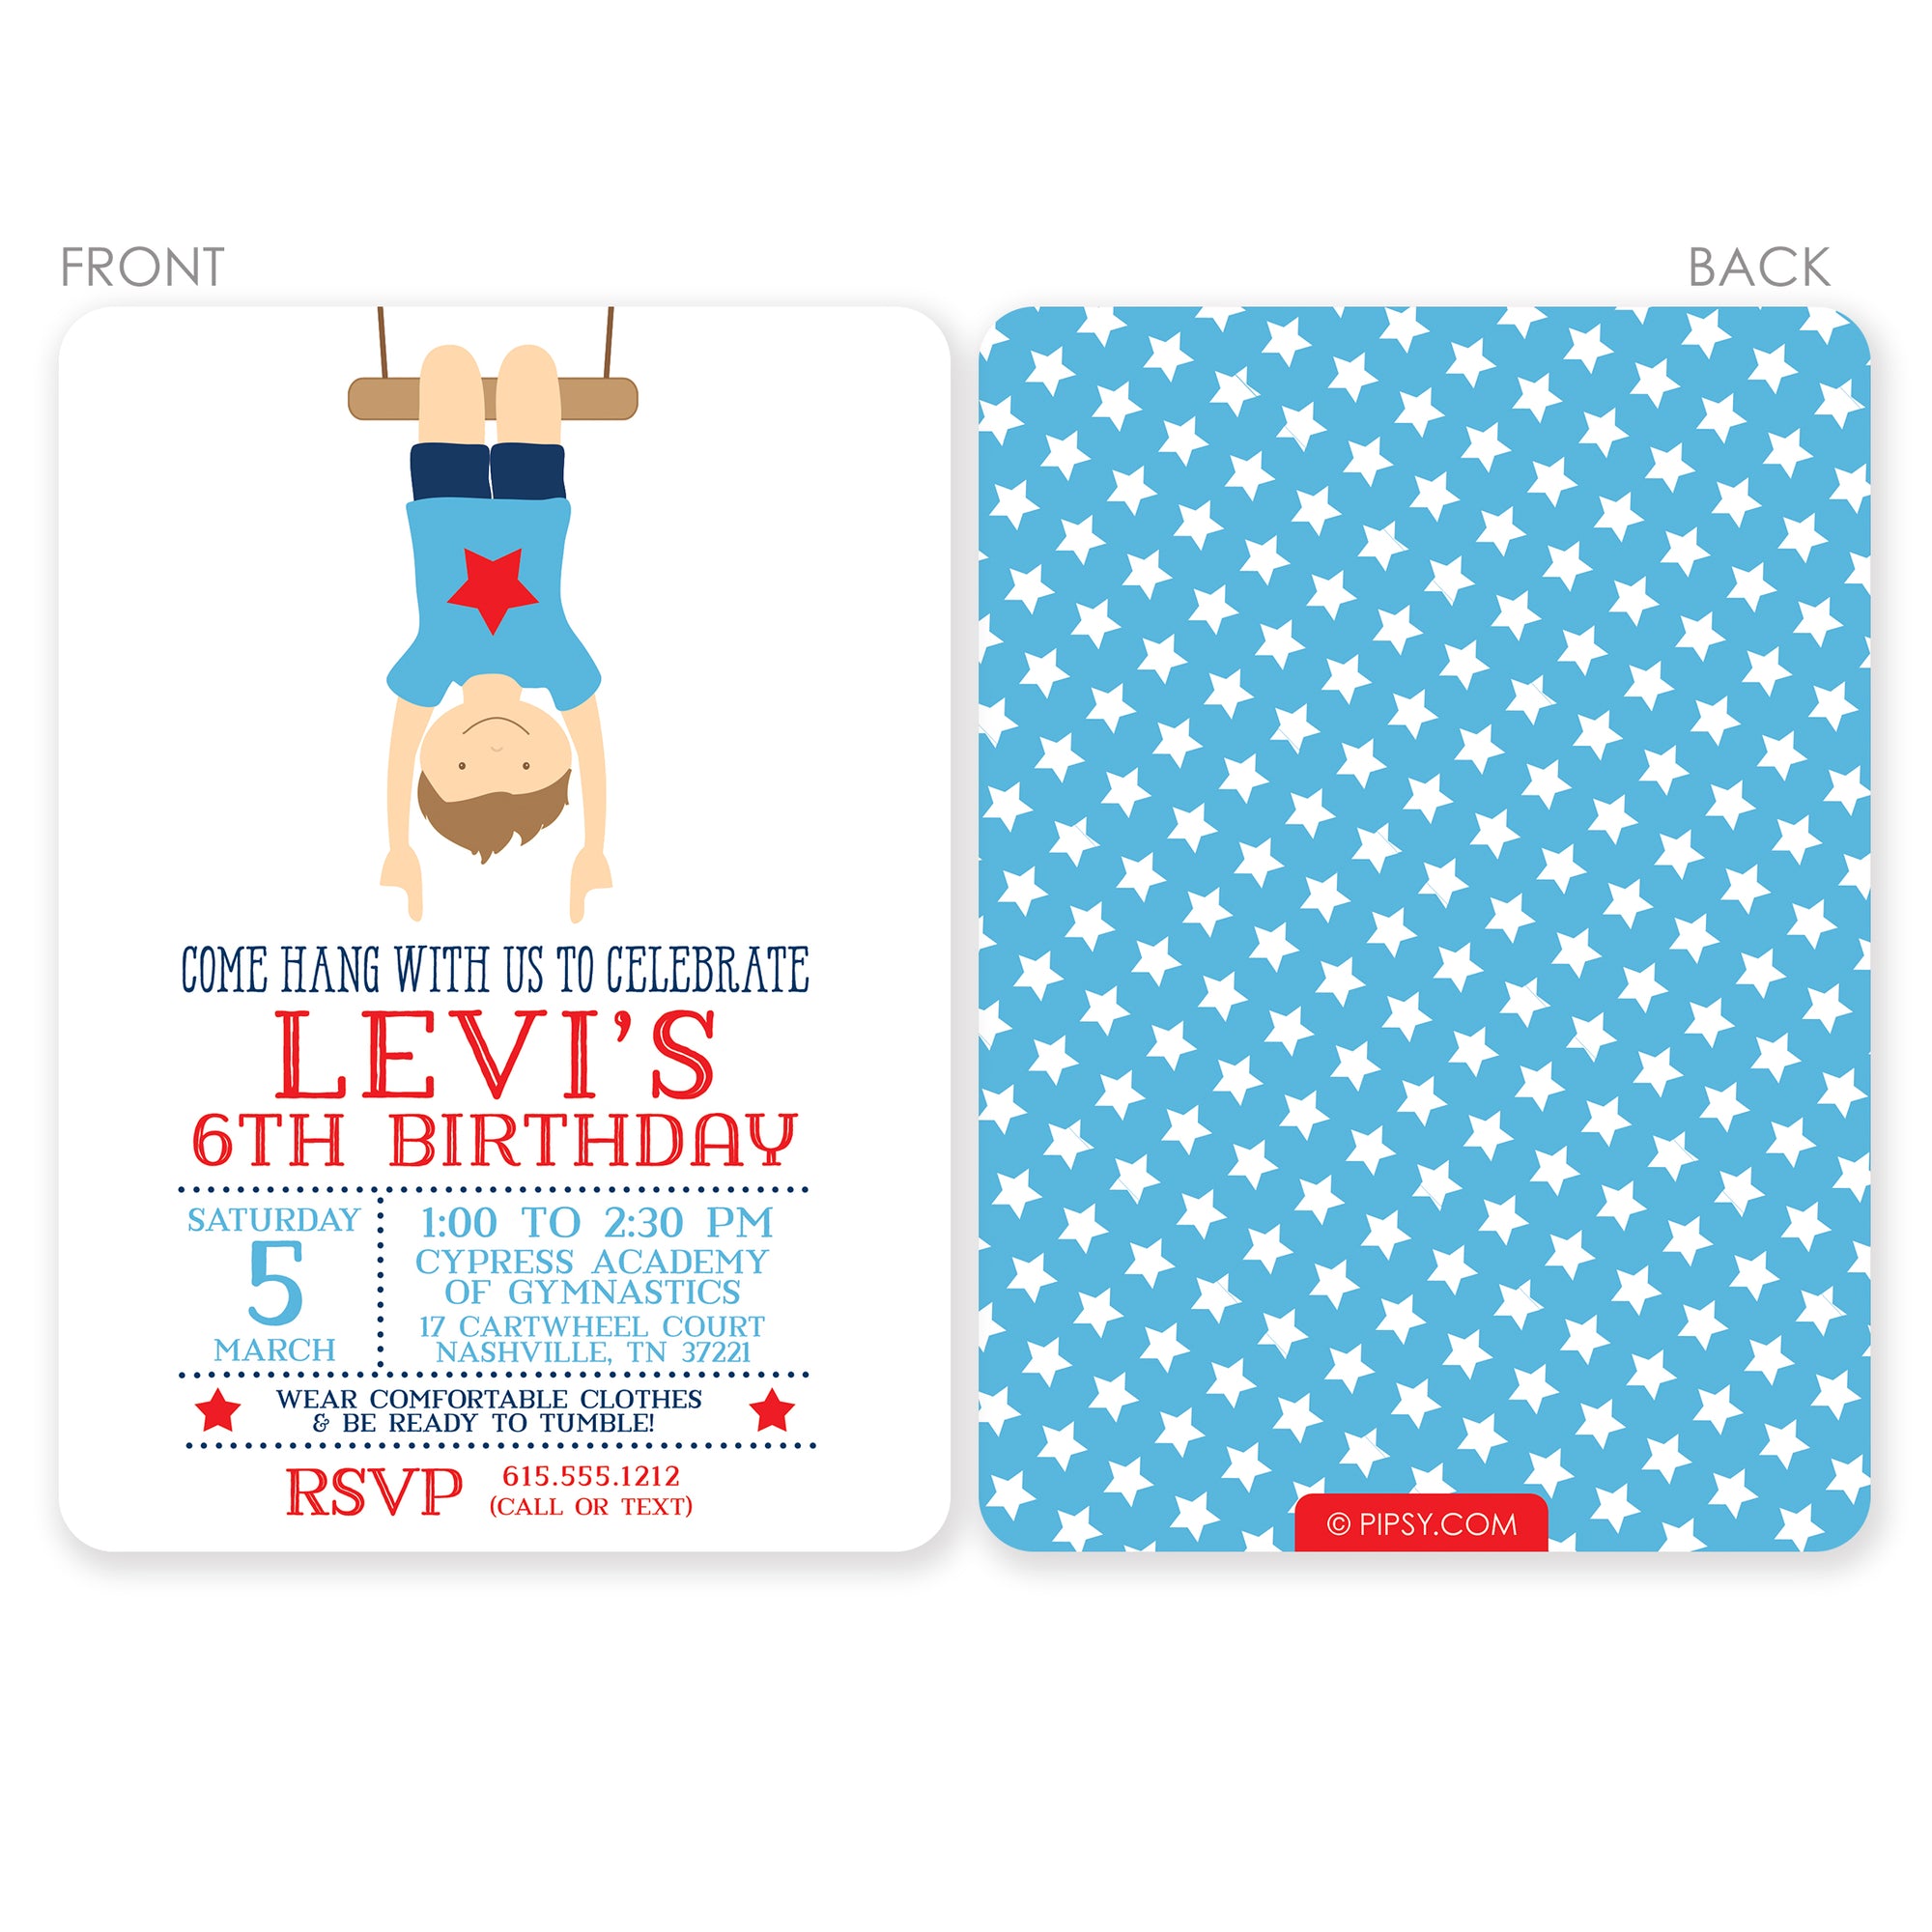 Our printed Gymnastics Birthday Invitations, Blue provide a custom touch for your special celebration. Printed on sturdy cardstock, these invites feature a classic gymnastics image perfect for creating memorable moments that will last a lifetime.